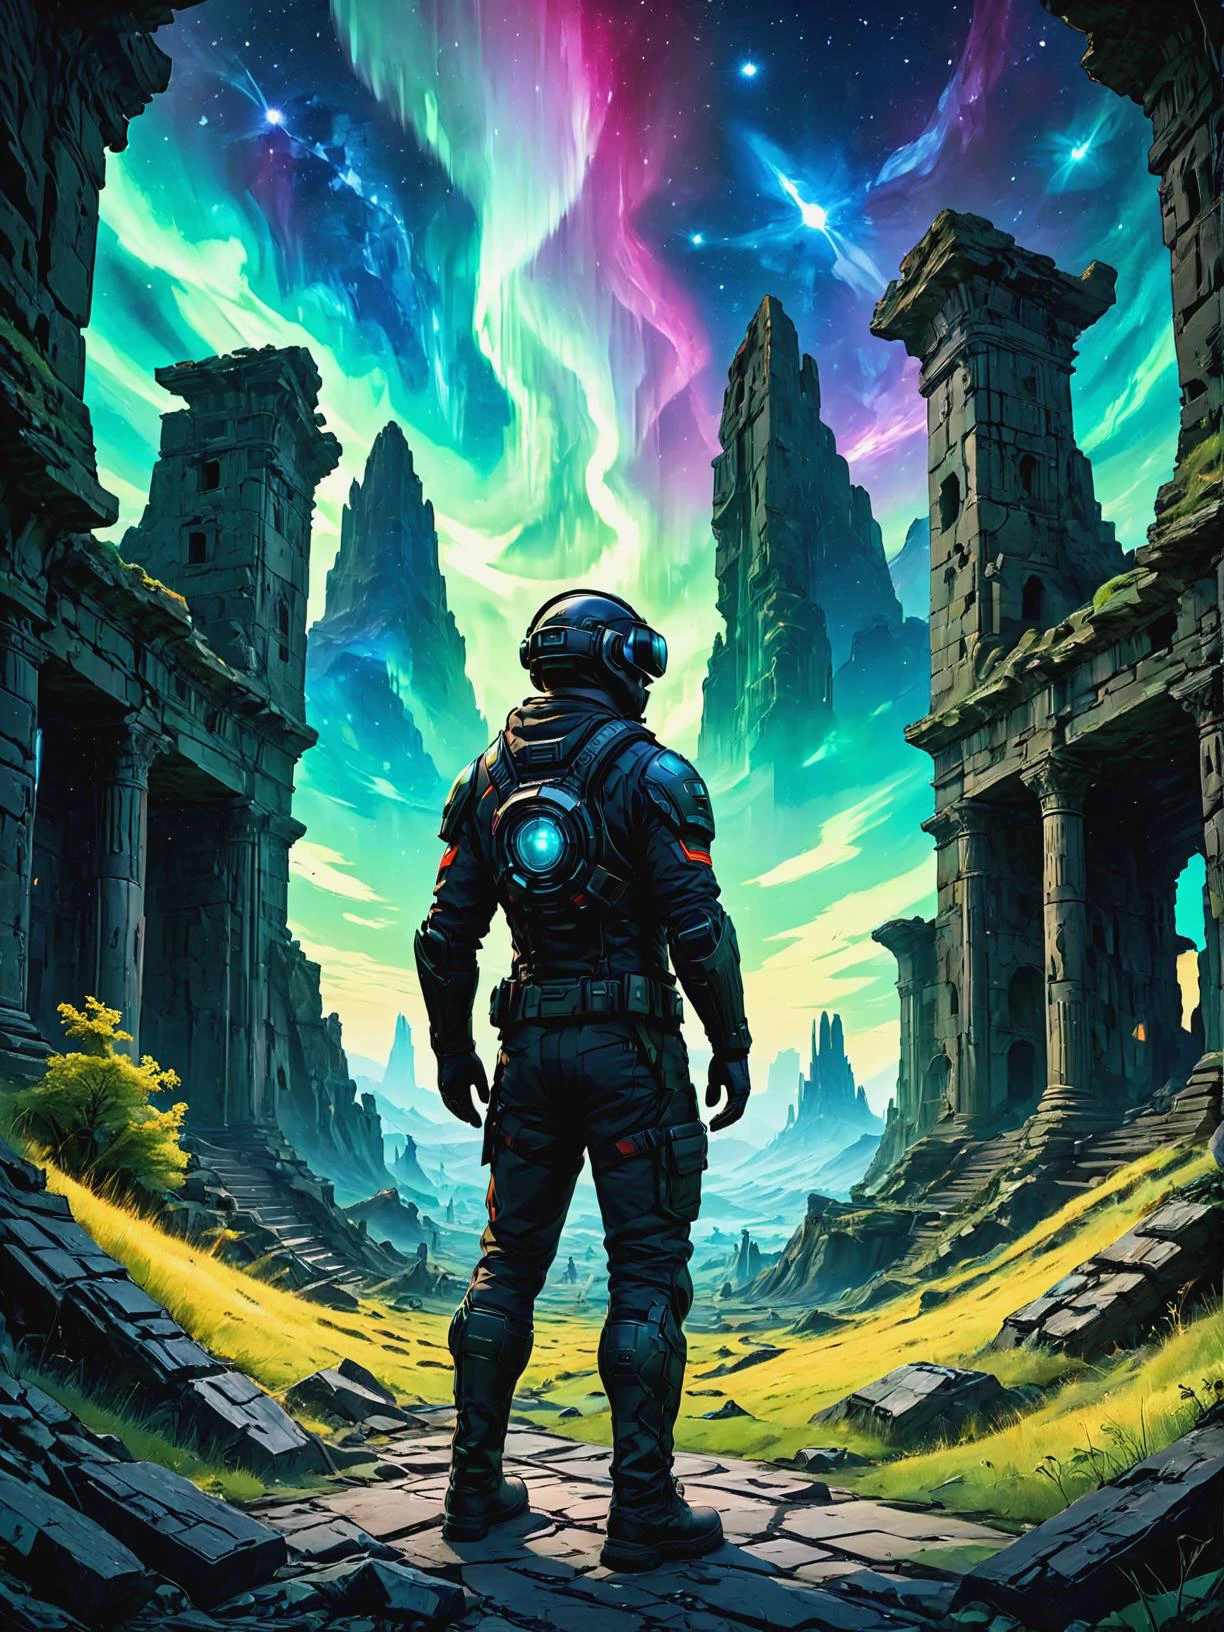 Virtual reality gamer with unmatched skills in Ancient ruins beneath cosmic auroras, ultra-fine digital painting, PENeonUV